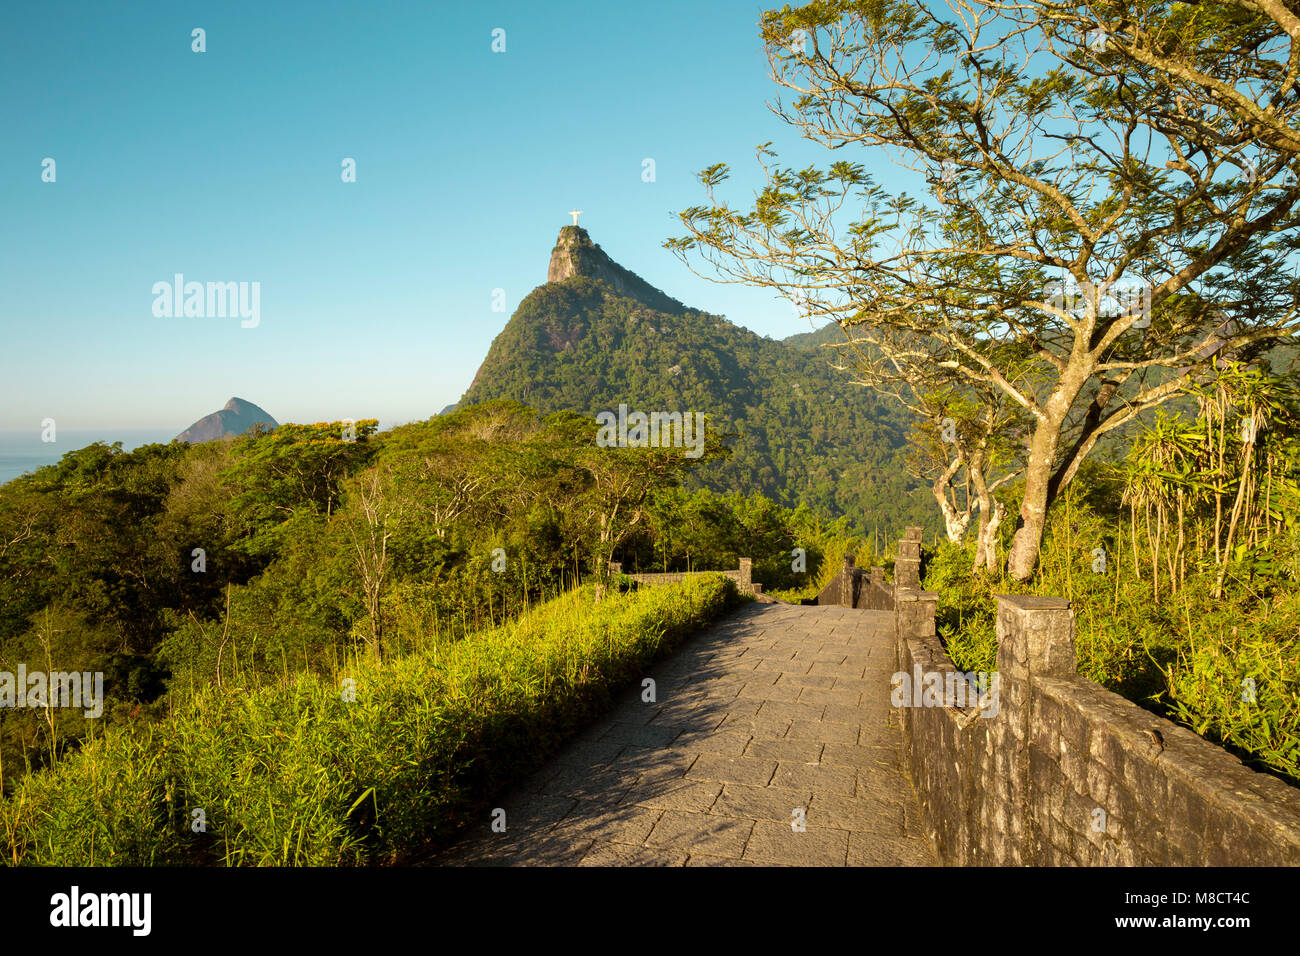 Panorama of Tijuca forest and Corcovado mountain in Rio de Janeiro, Brazil Stock Photo